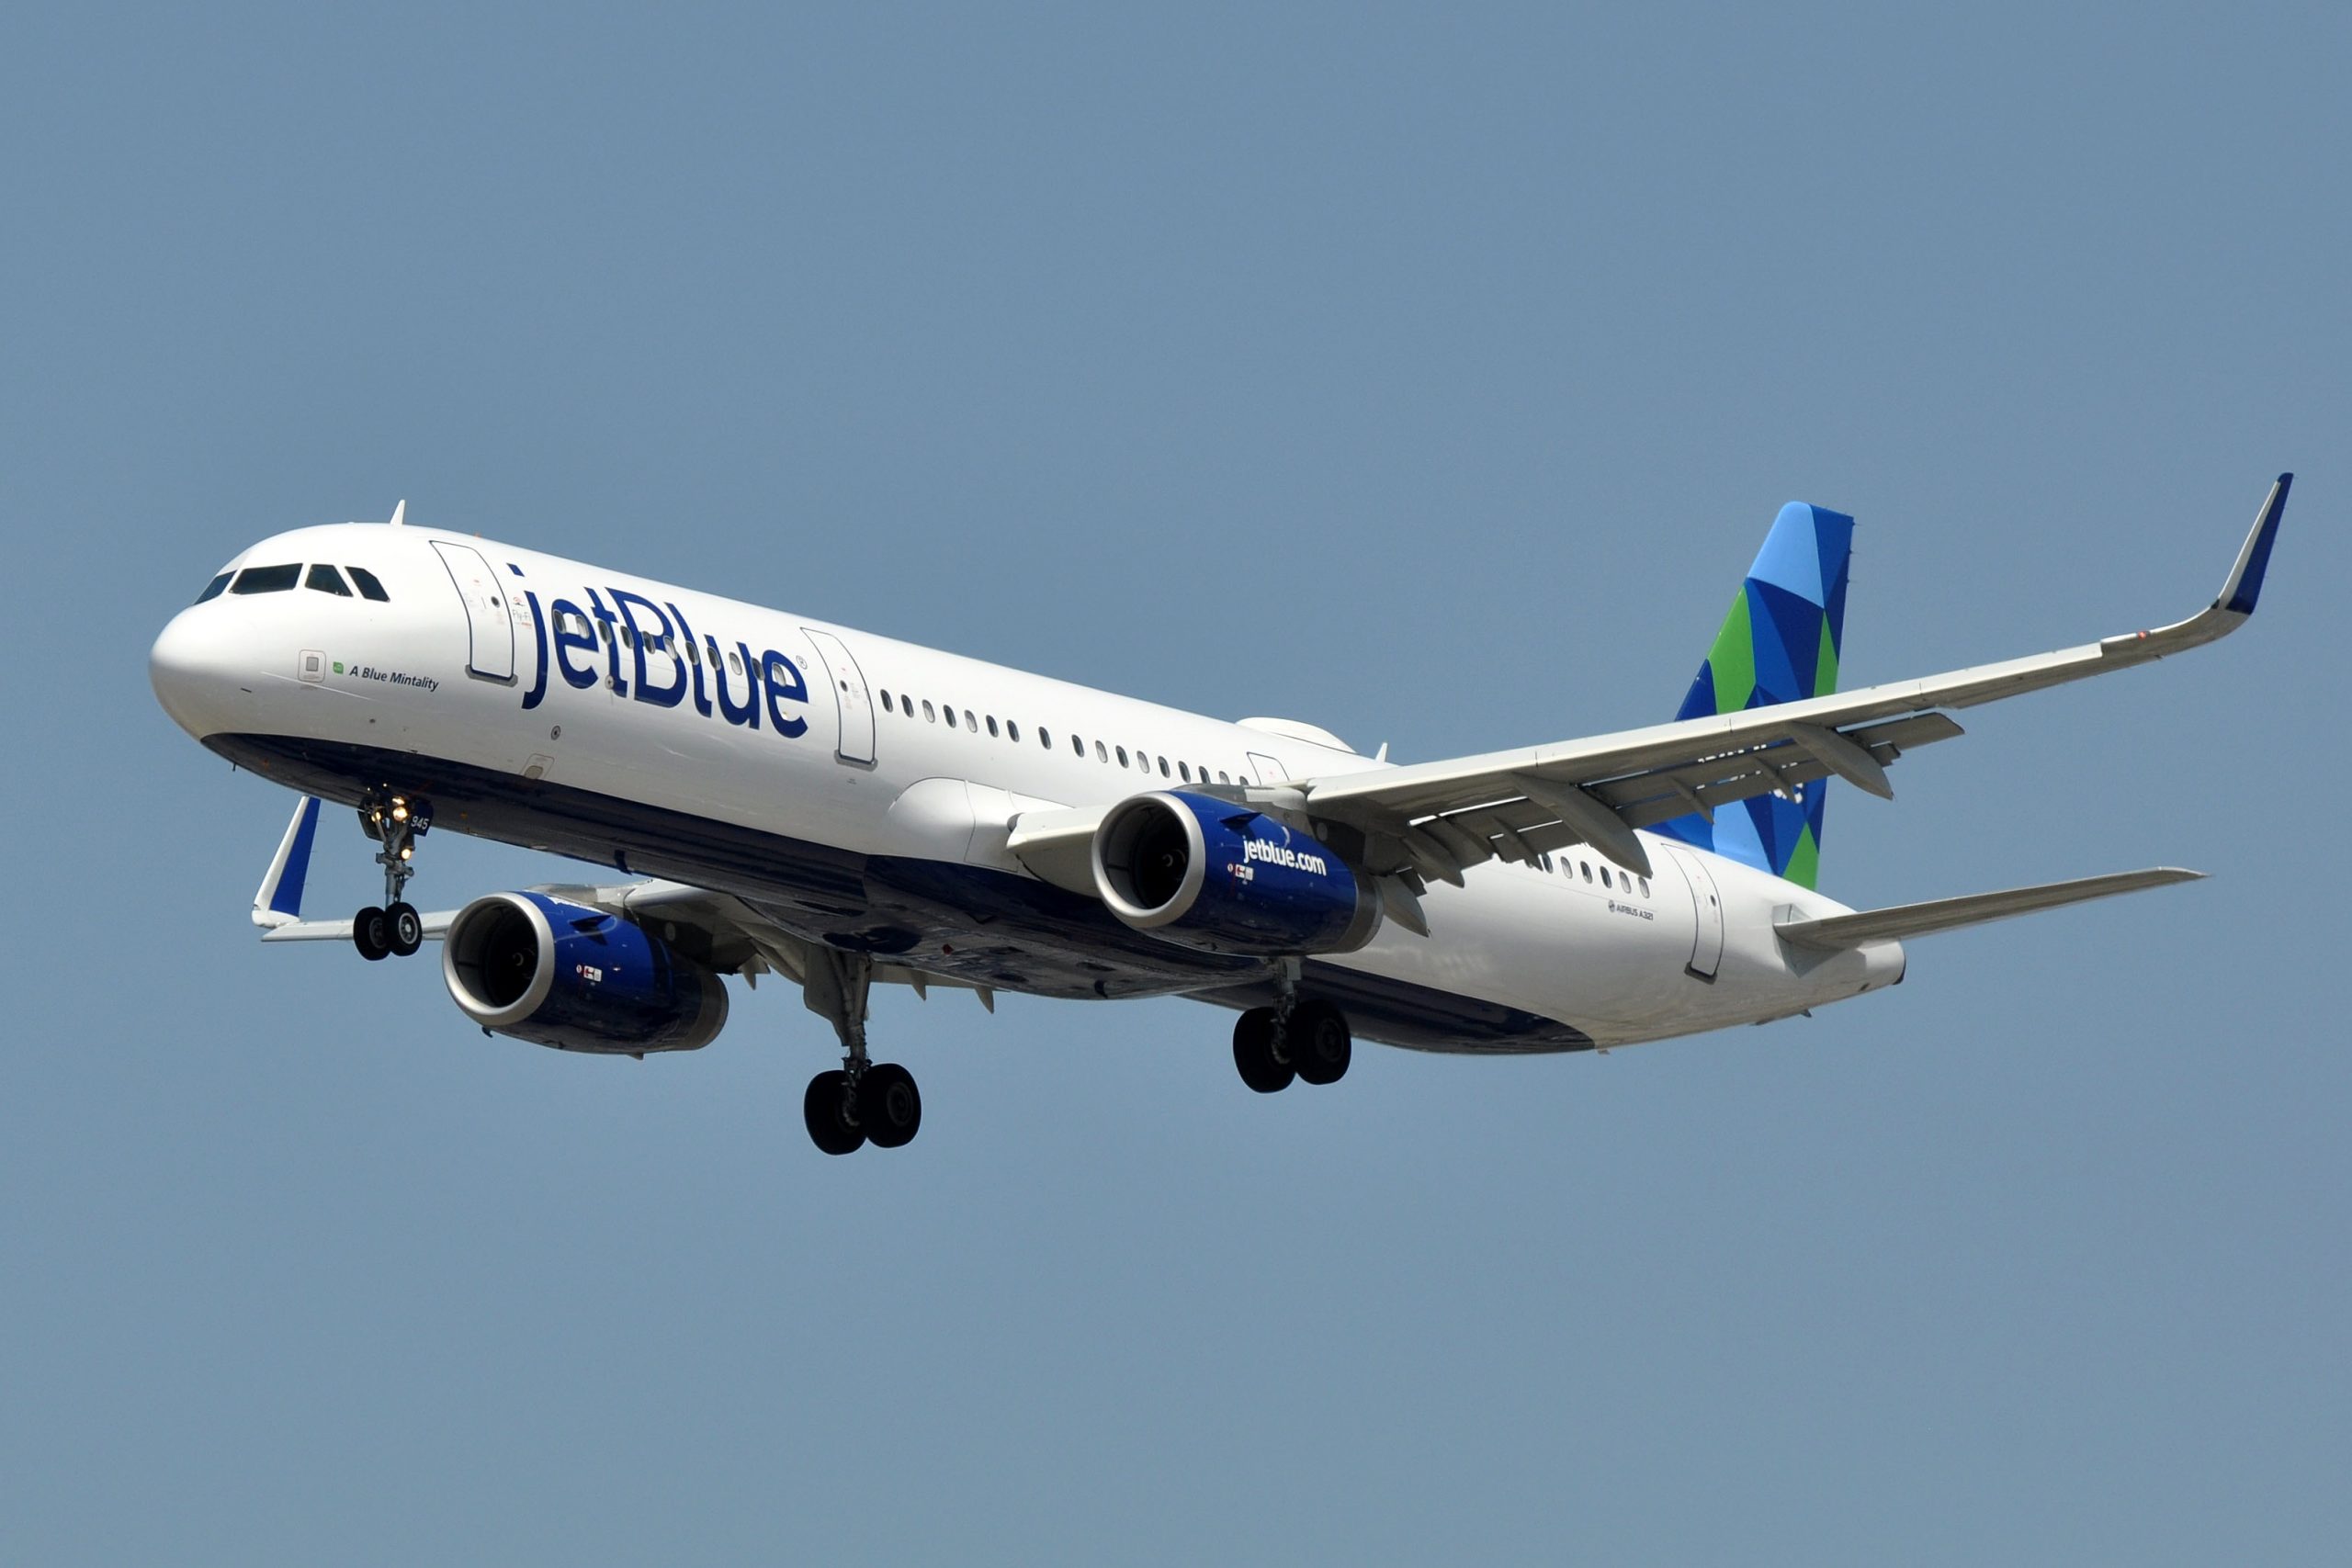 Machinists Union’s Air Transport General Vice President Demands JetBlue Restore Workers’ Hours and Pay